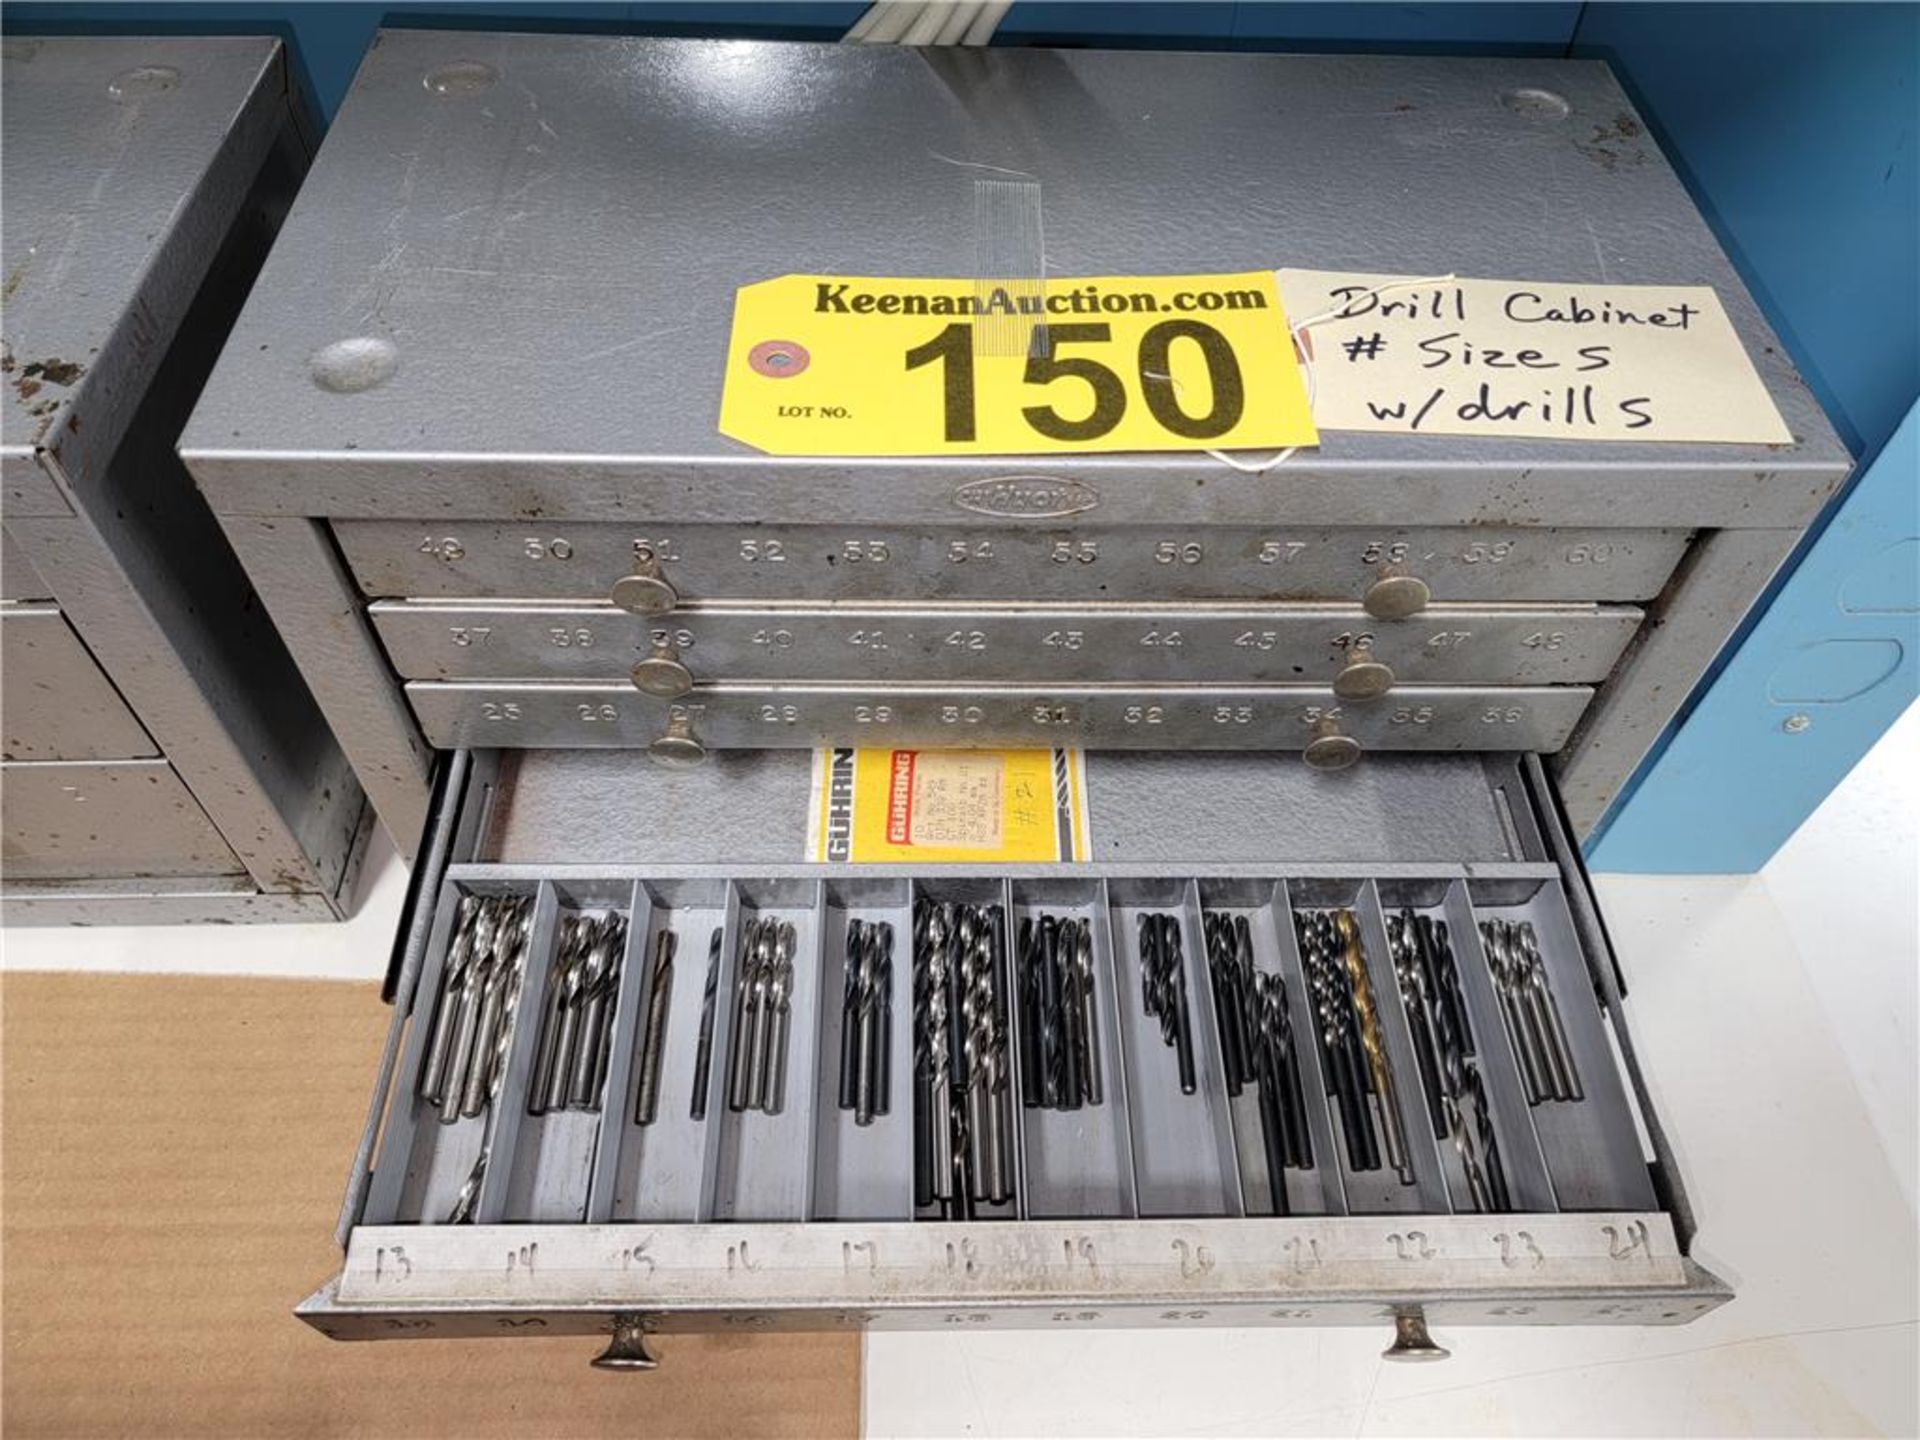 DRILL CABINET # SIZES W/DRILLS - Image 3 of 6